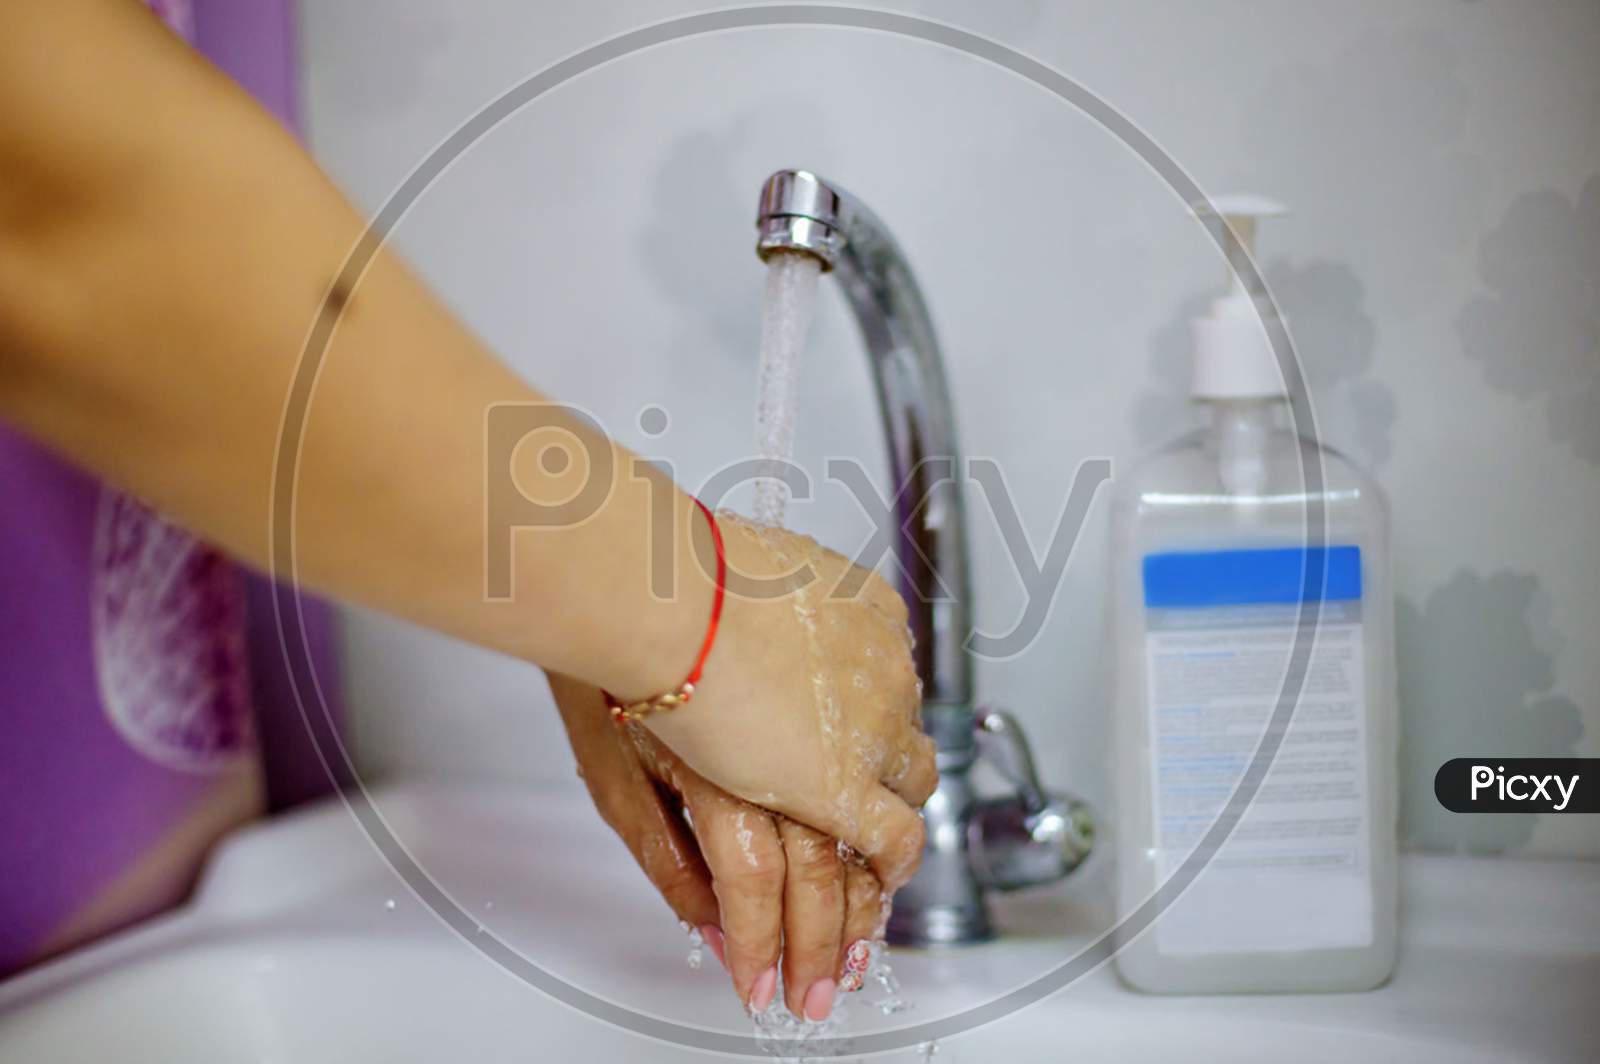 a woman washes her hands next to an alcohol gel or antibacterial disinfectant soap